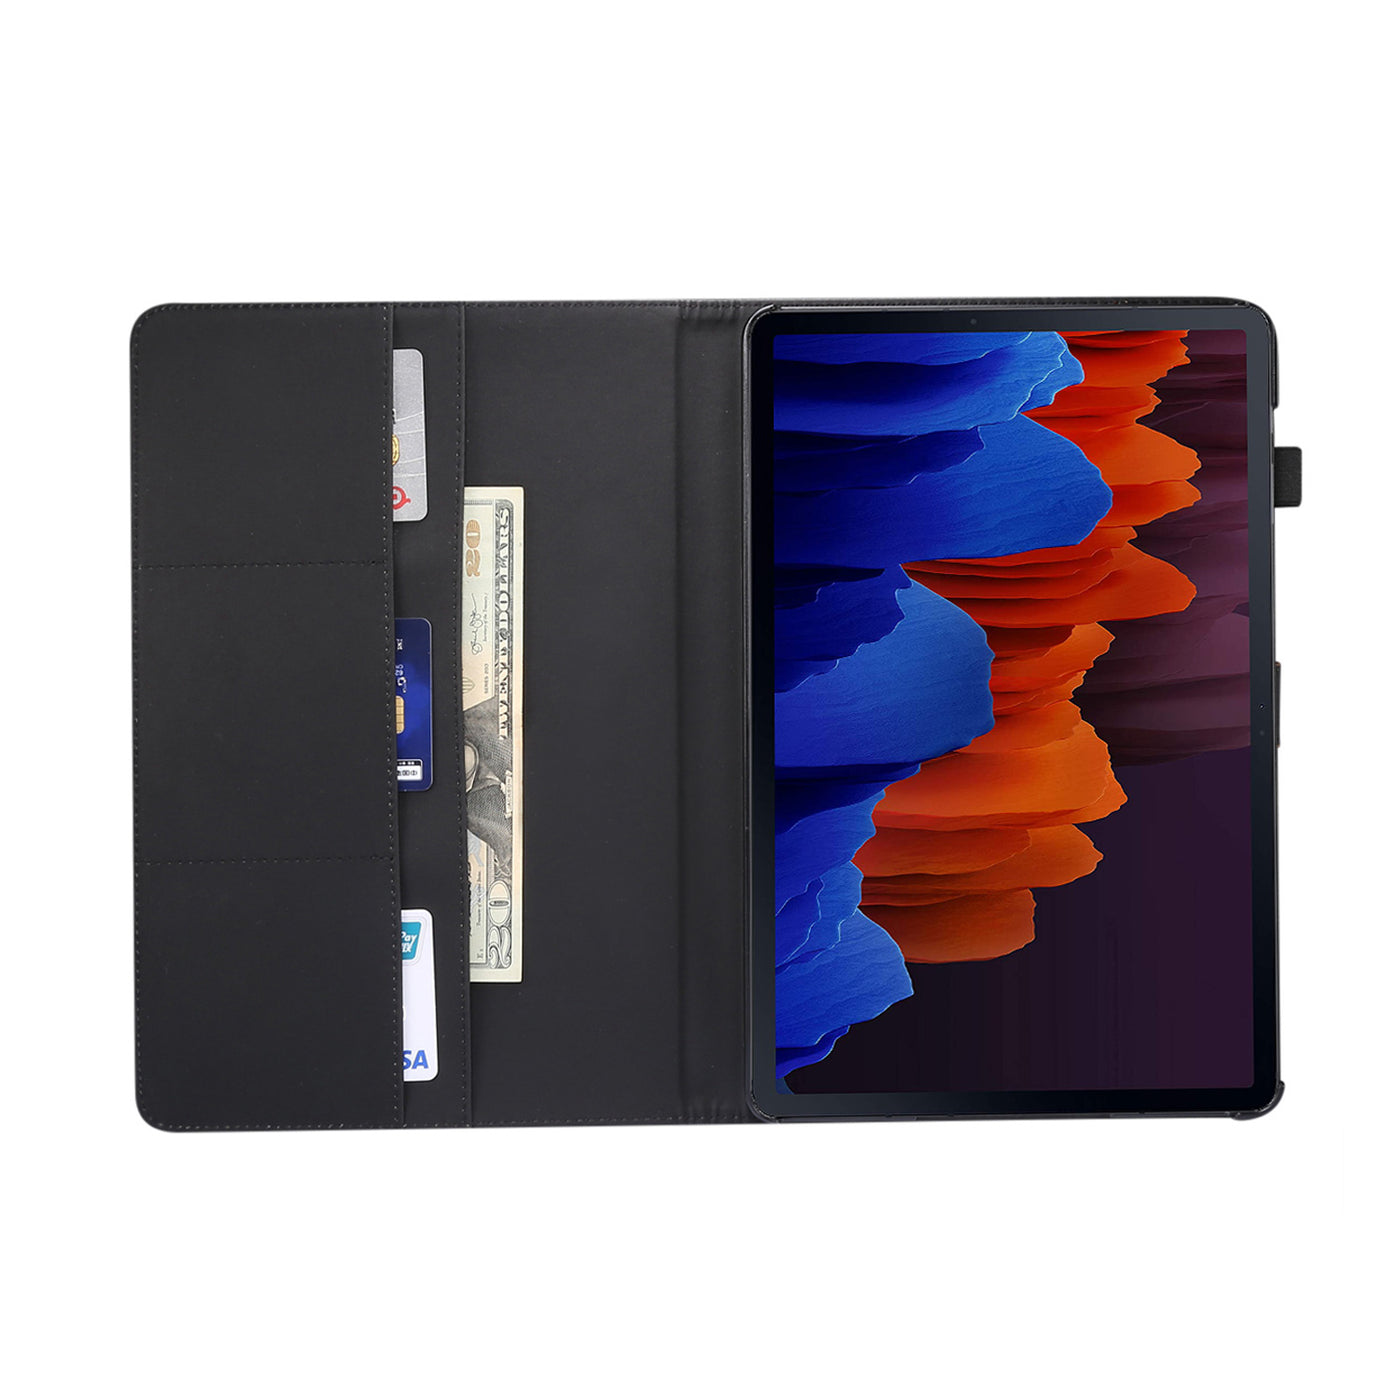 Samsung Galaxy Tab S7 Leather Wallet flip case cover with stand function